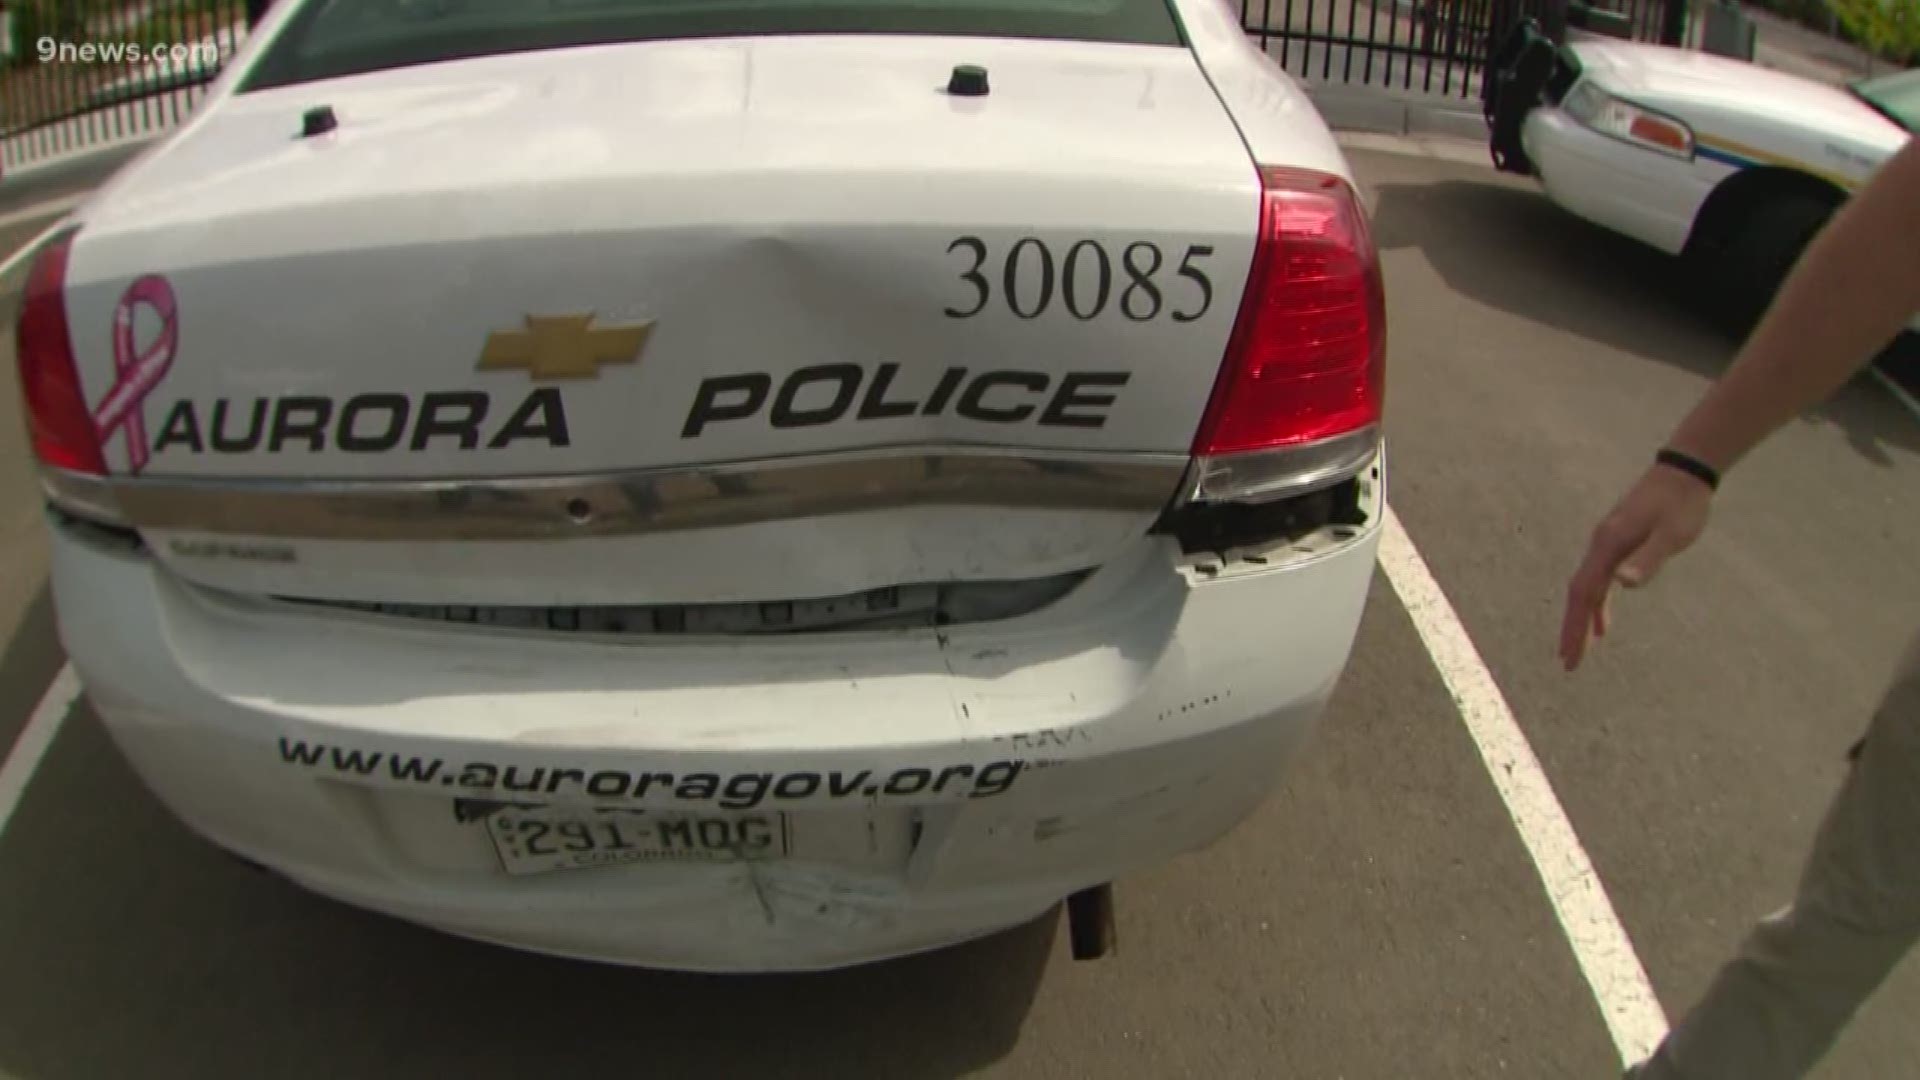 Police say a drunk driver has smashed a patrol car for the fourth time in a month.